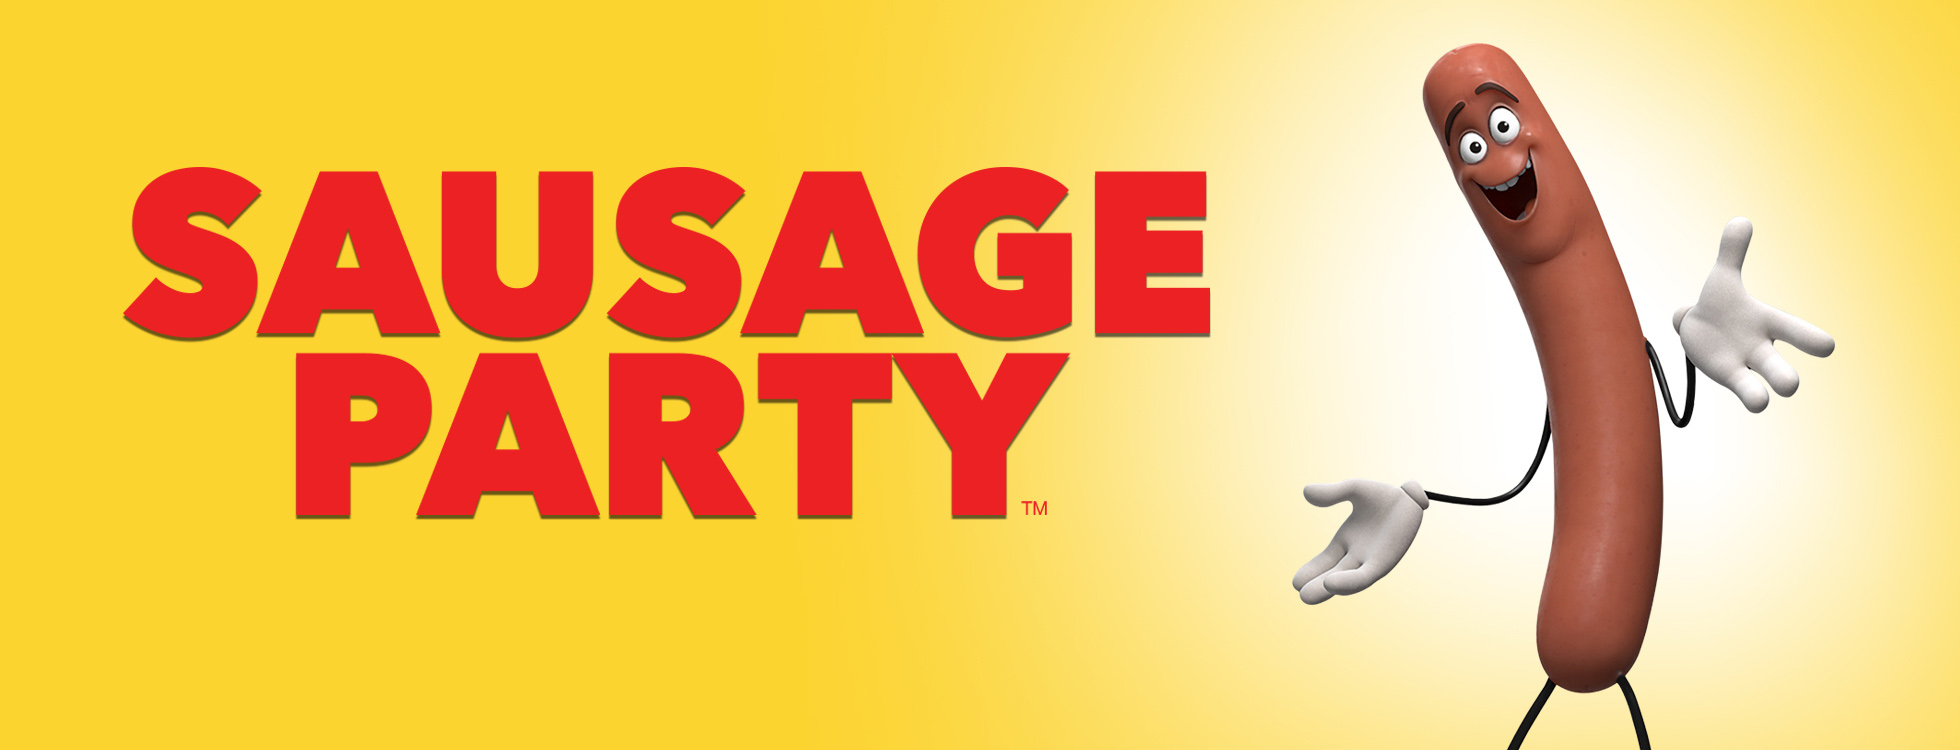 Watch [16+] Sausage Party